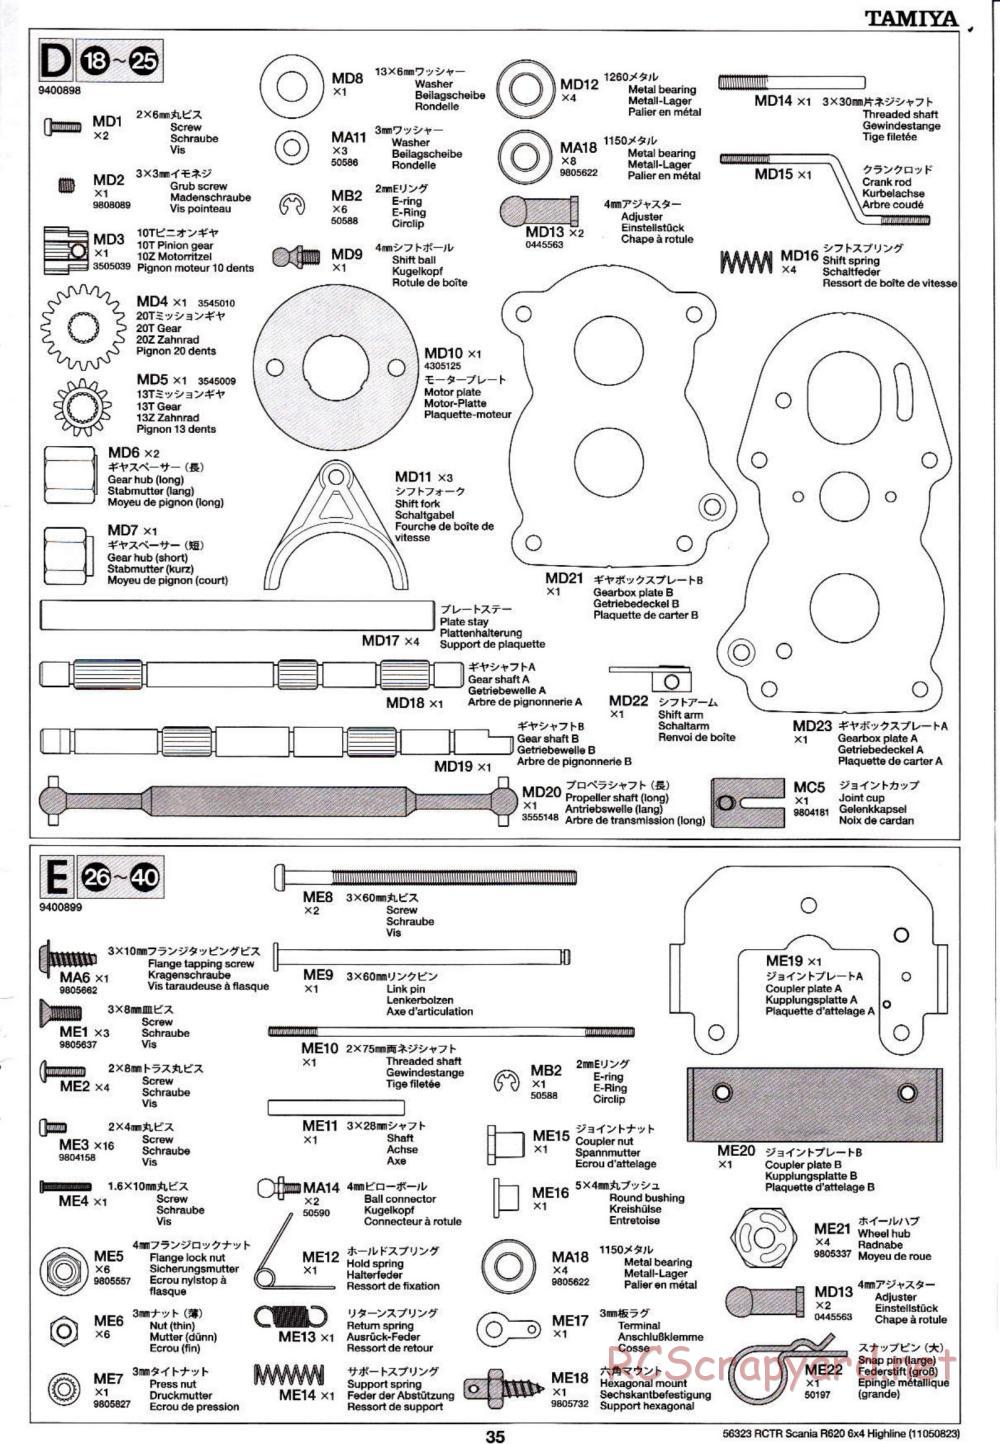 Tamiya - Scania R620 6x4 Highline Tractor Truck Chassis - Manual - Page 35